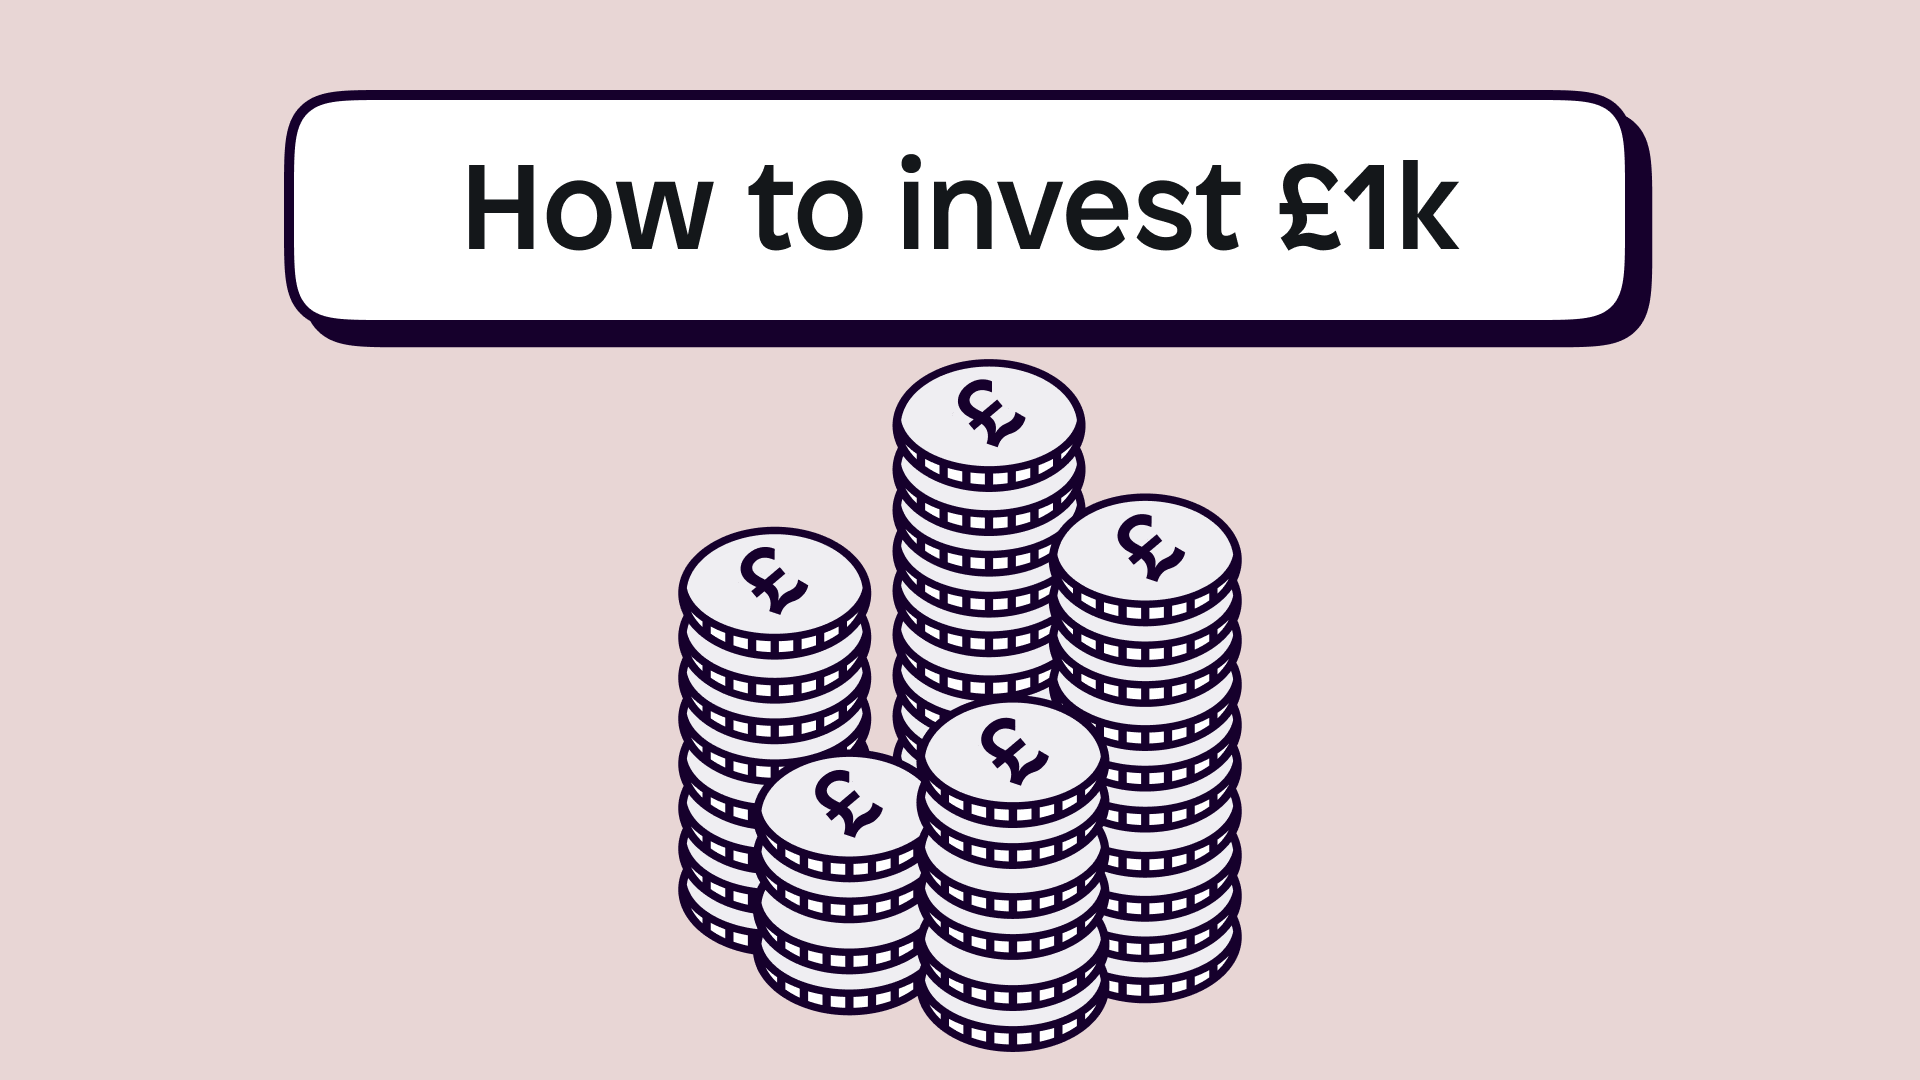 Pound coins titled how to invest £1k